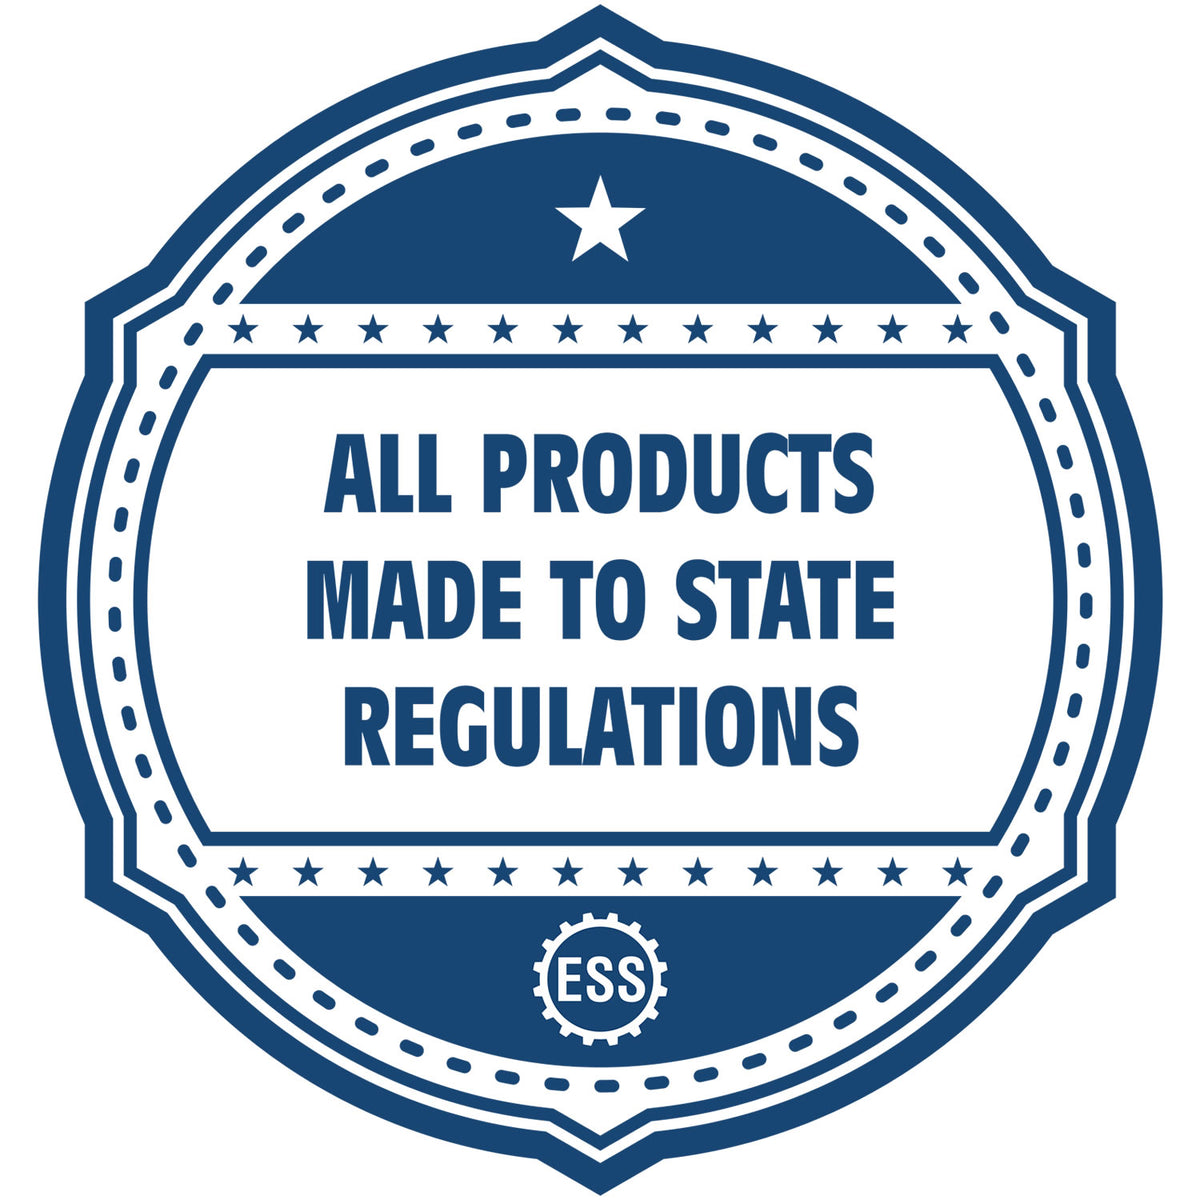 A blue icon or badge for the Heavy Duty Cast Iron Kansas Geologist Seal Embosser showing that this product is made in compliance with state regulations.